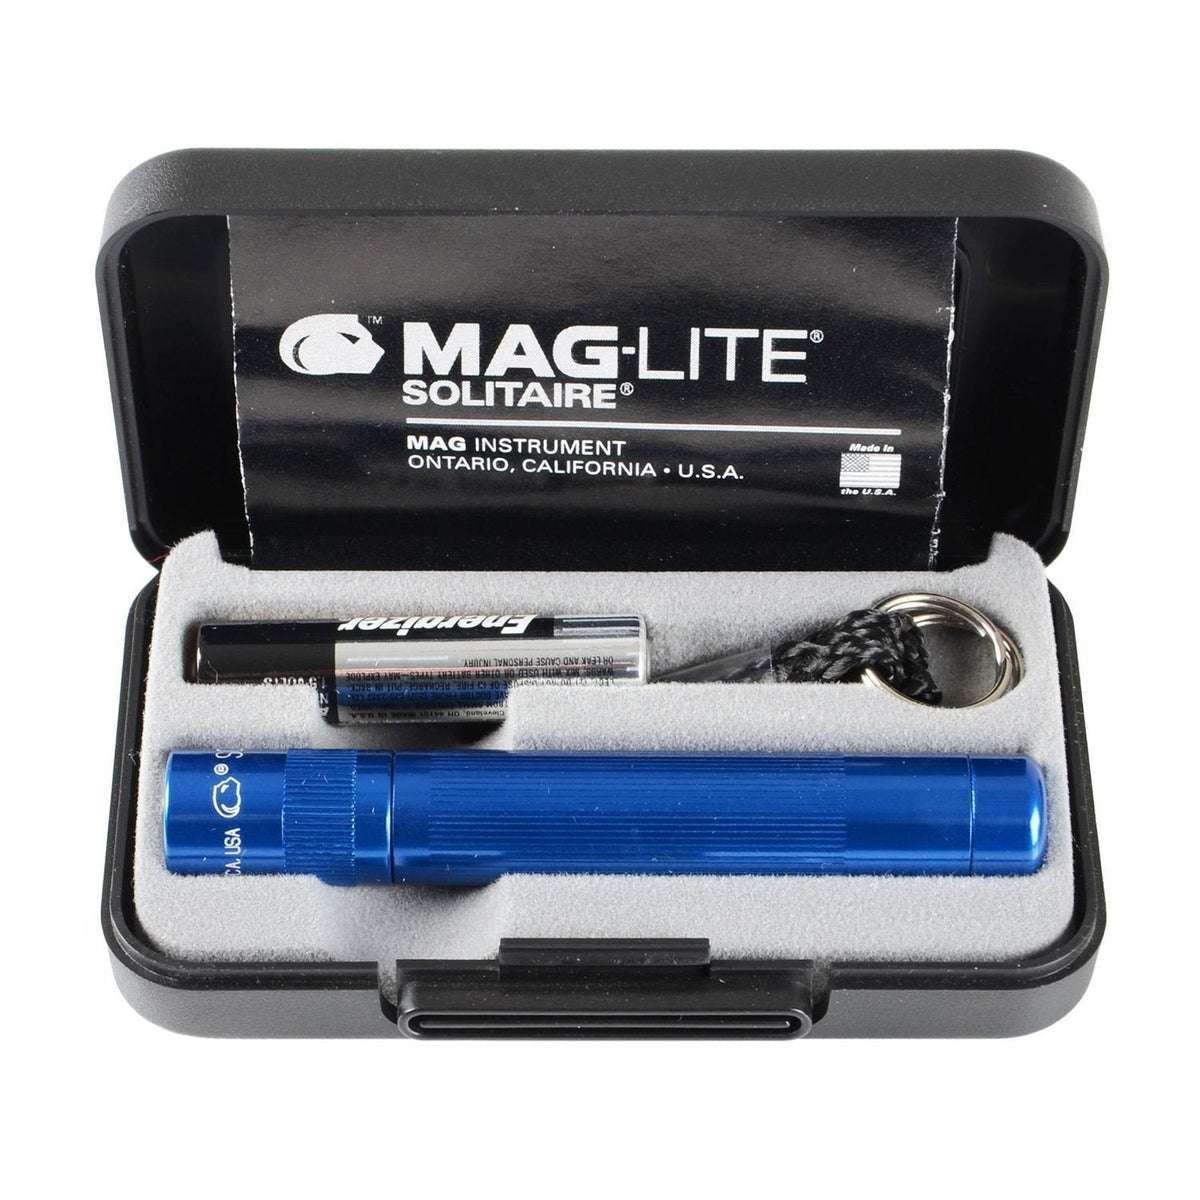 Maglite Solitaire AAA Incandescent Keychain Light in Presentation Box - Blue Flashlights and Lighting Maglite Tactical Gear Supplier Tactical Distributors Australia